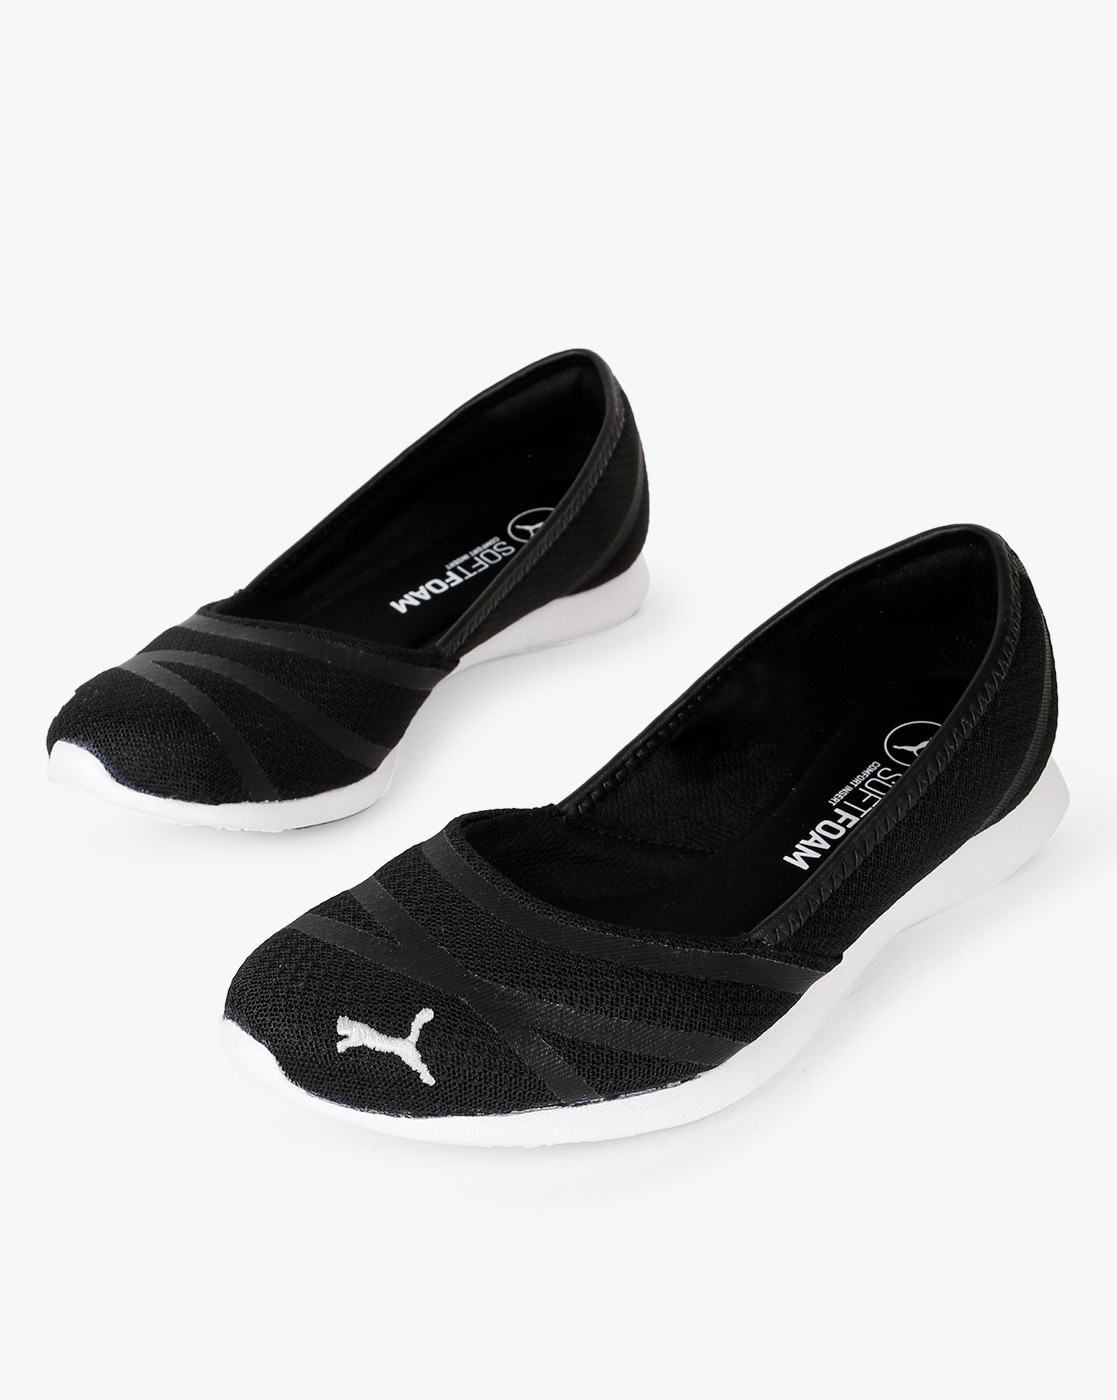 Buy Black Flat Shoes for Women by Puma 